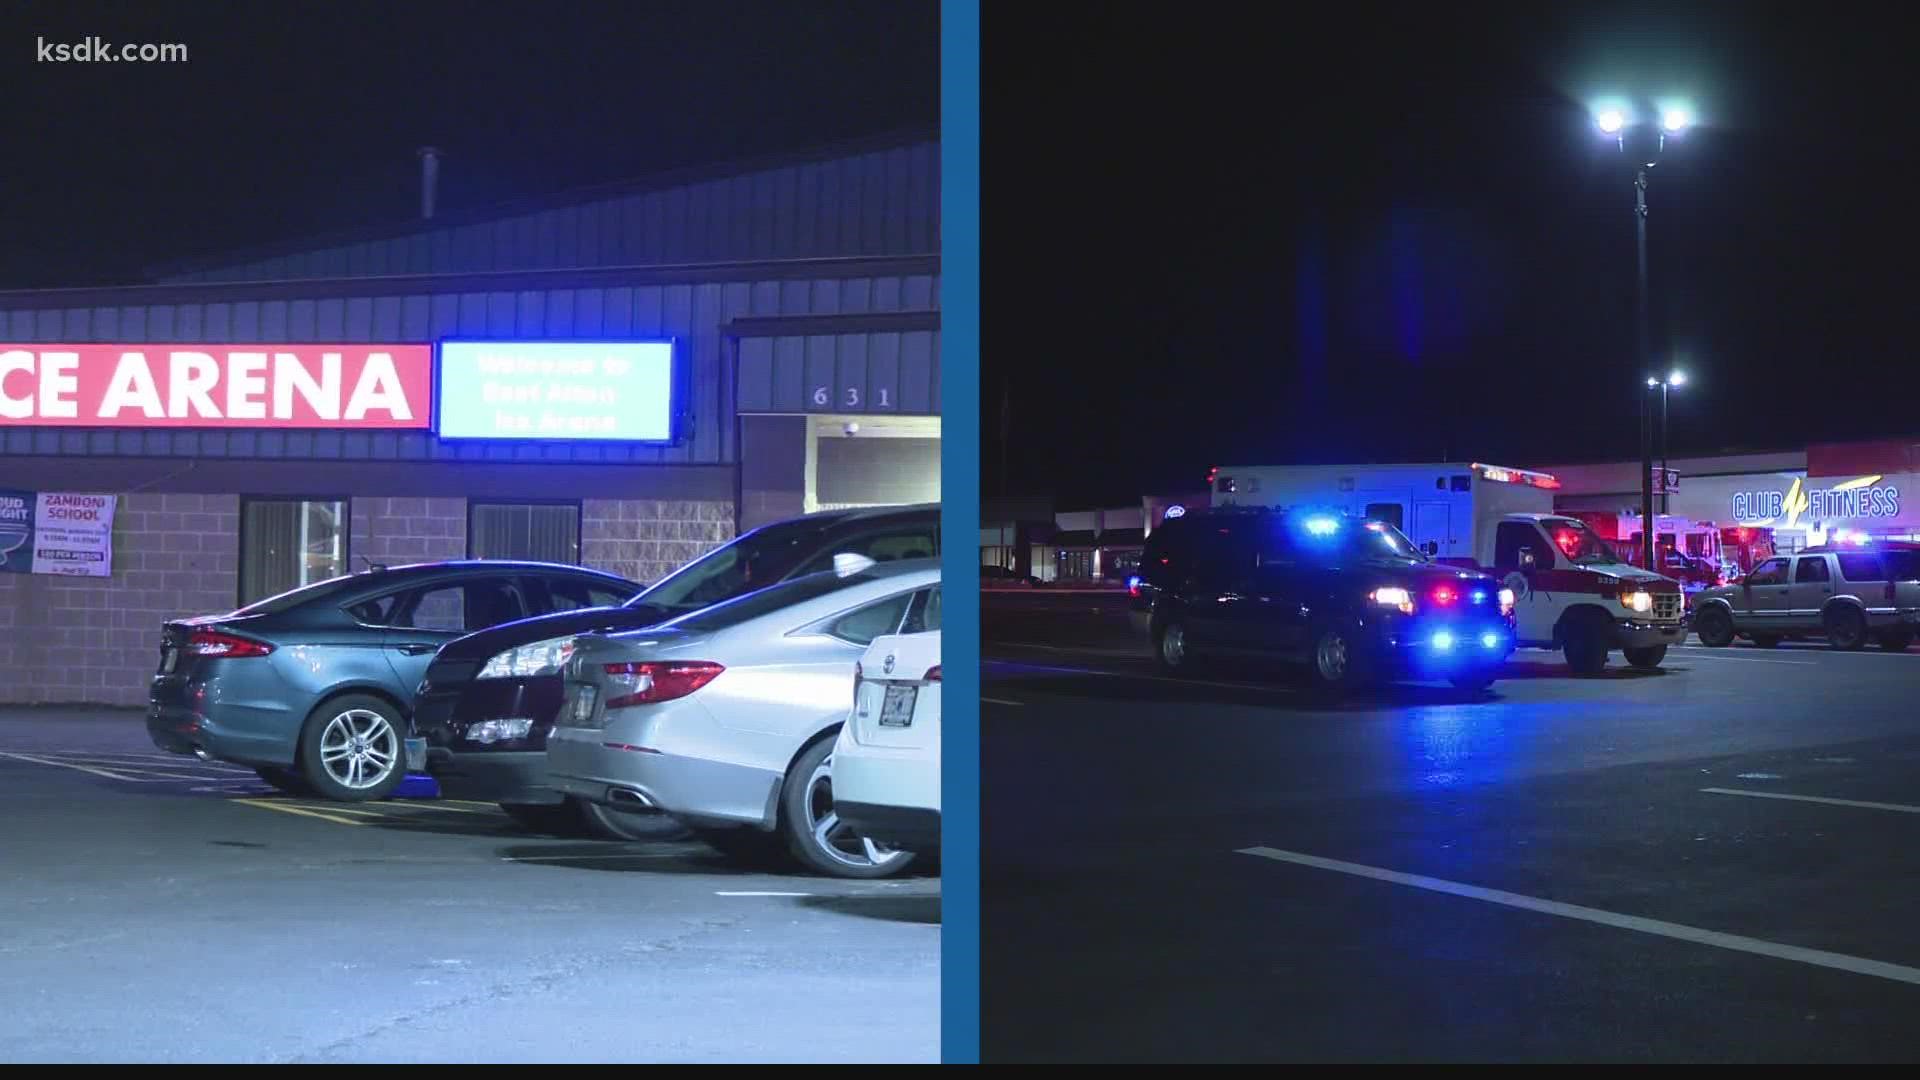 Police in East Alton responded to a report of a shooting outside an ice arena where a youth hockey game was getting ready to start Saturday night.